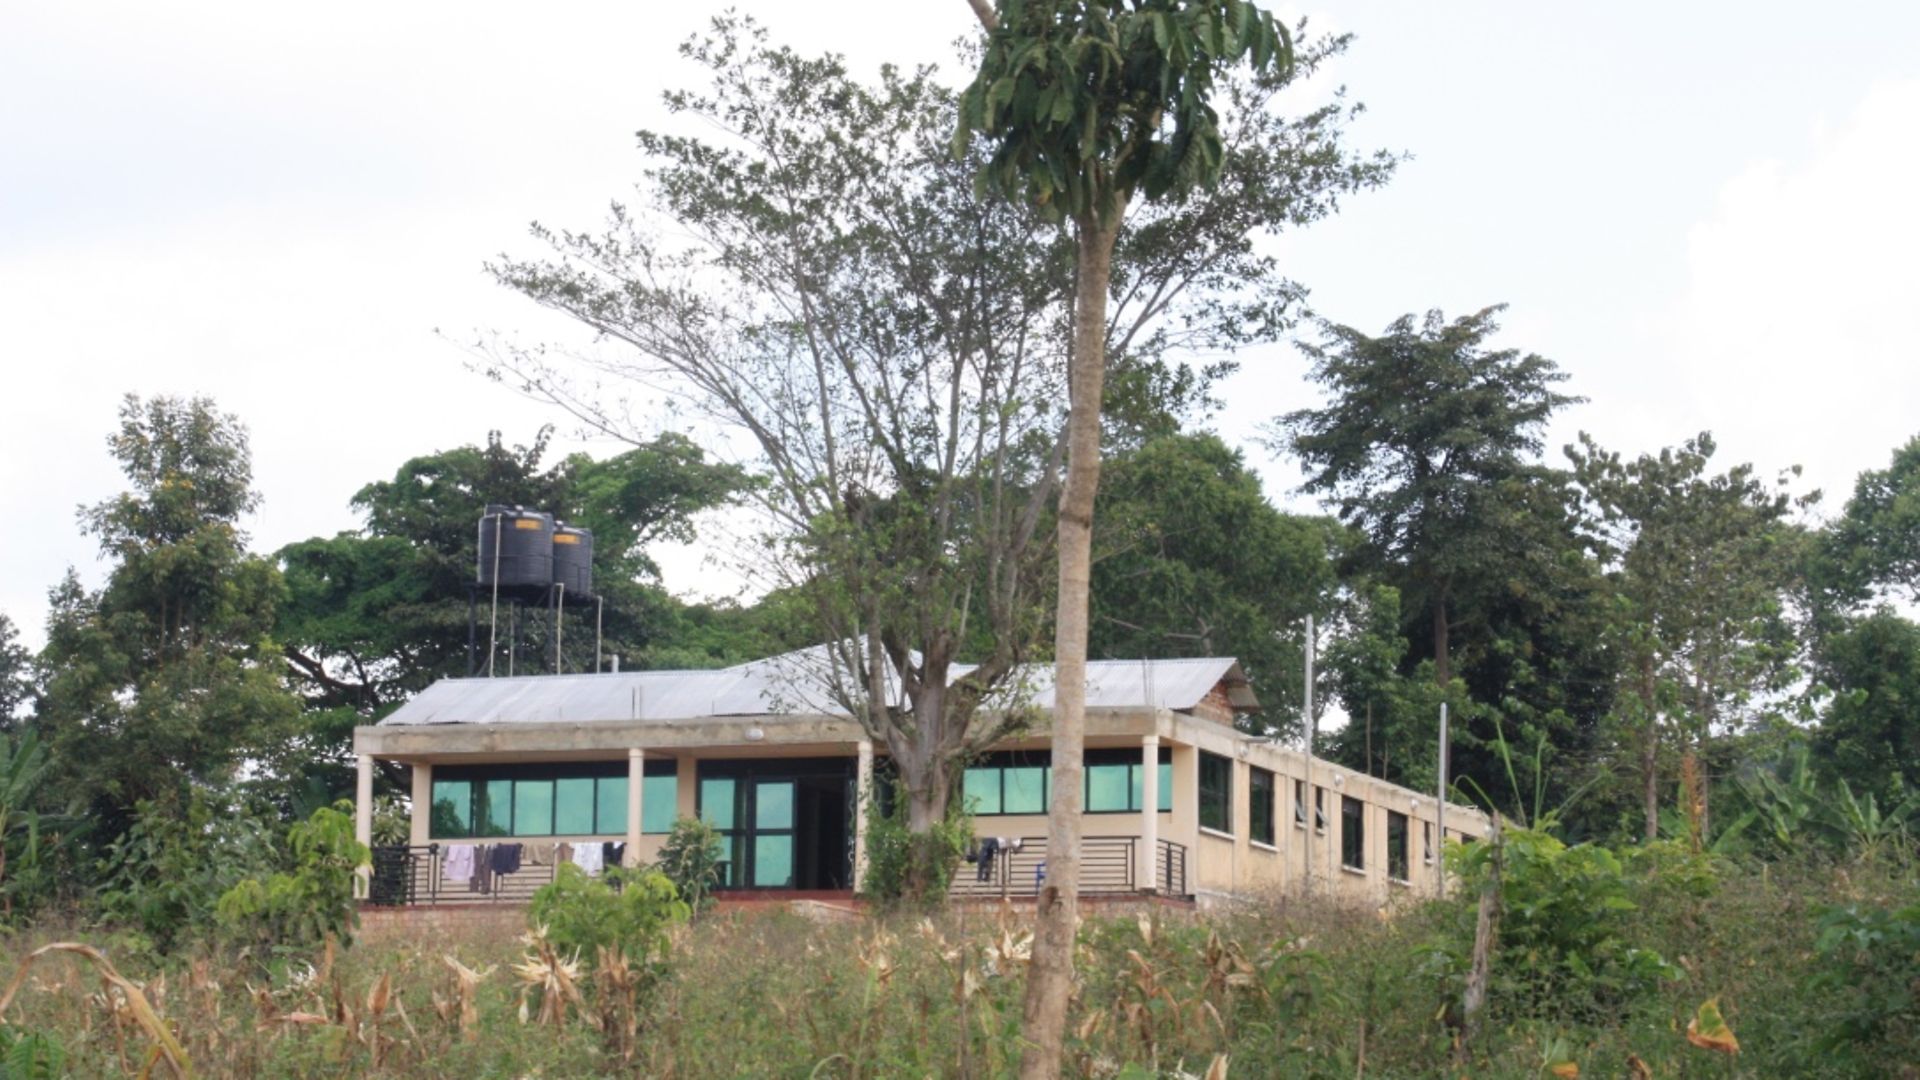 The new building for girls of the Mirembe Cottage of Street Girls